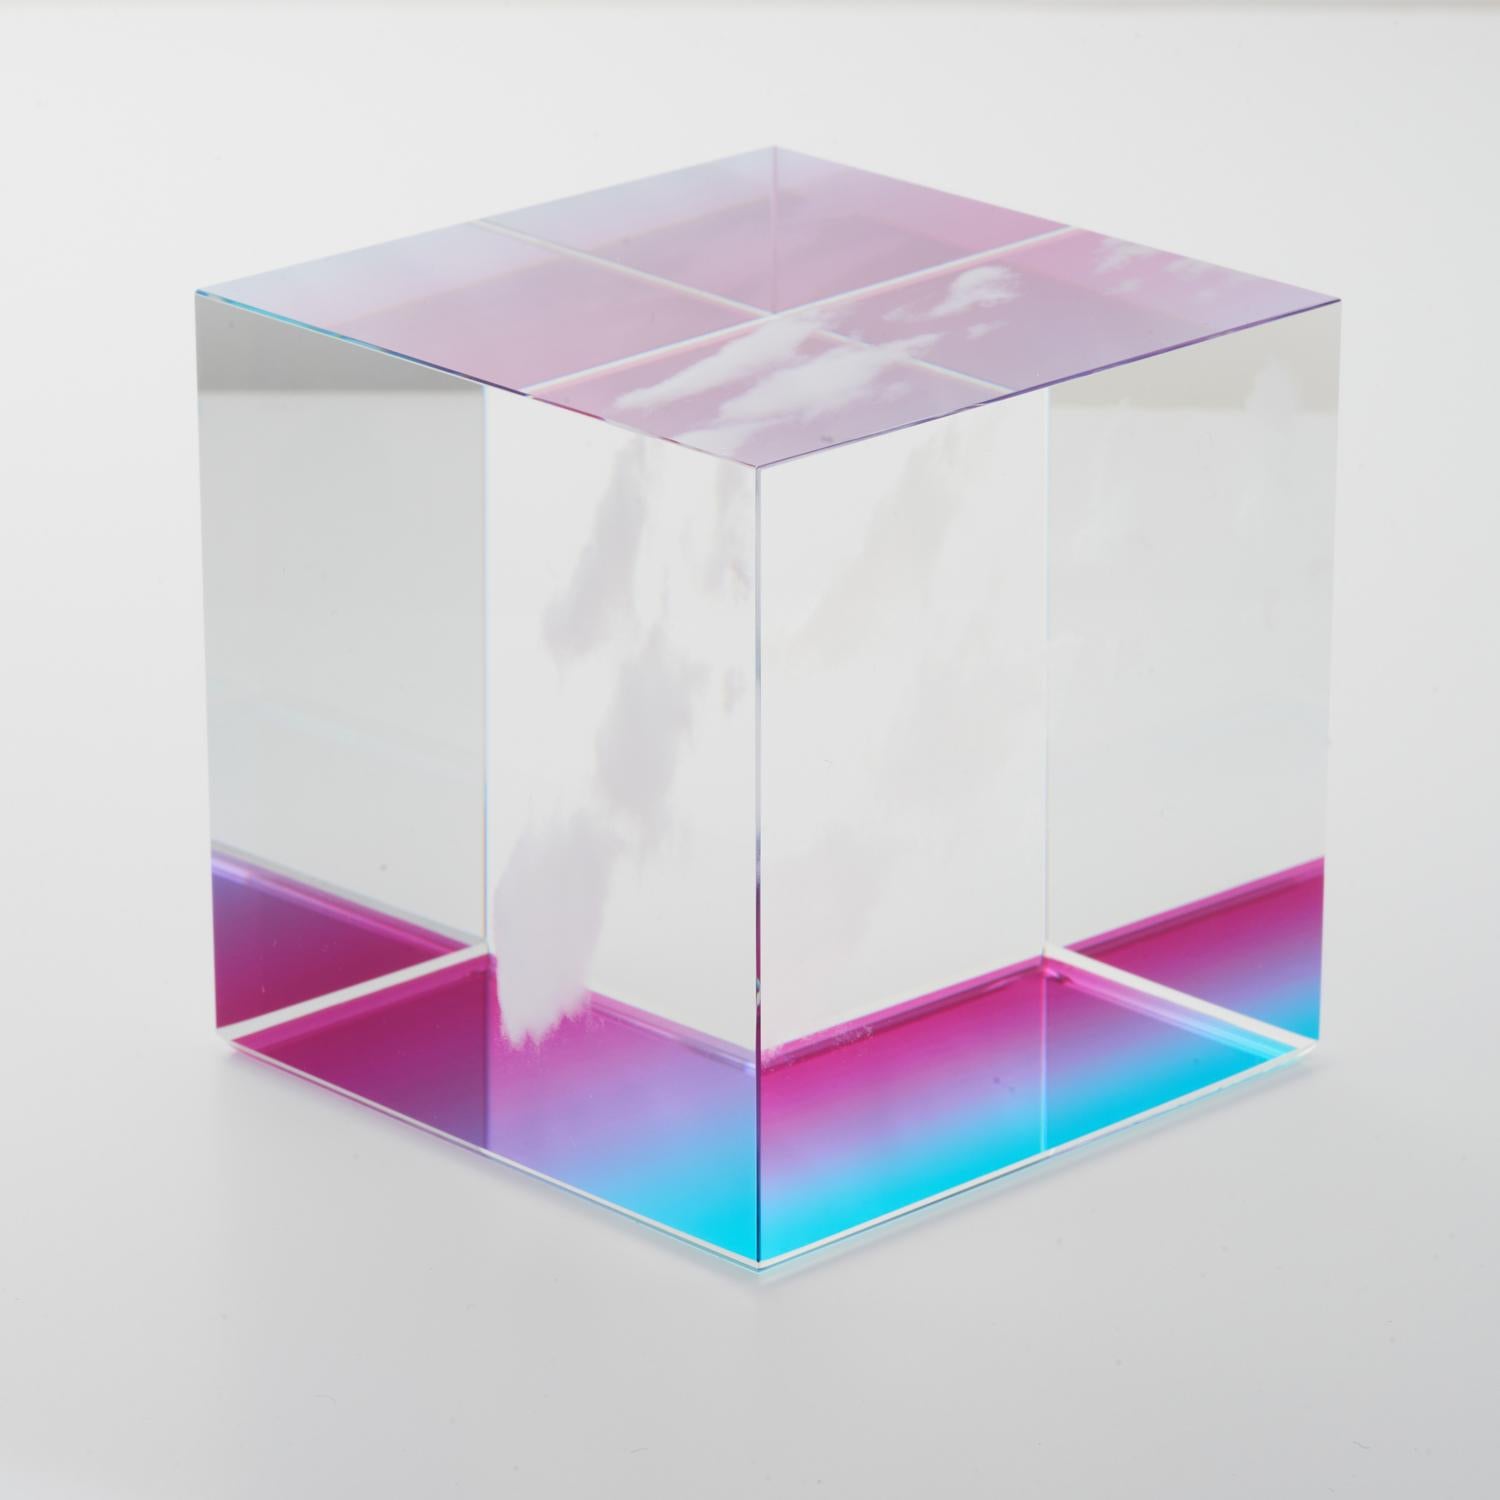 MIYA ANDO
Winter Dawn Clouds (The Glass House), 2023
4 x 4 x 4 inches
Solid, Colored Optical Glass
Edition of 15
Accompanied by a signature label

Shizen (Nature) Kumo (Cloud) for Glass House:

The Kumo (Cloud) cube is a sculpture inspired by a